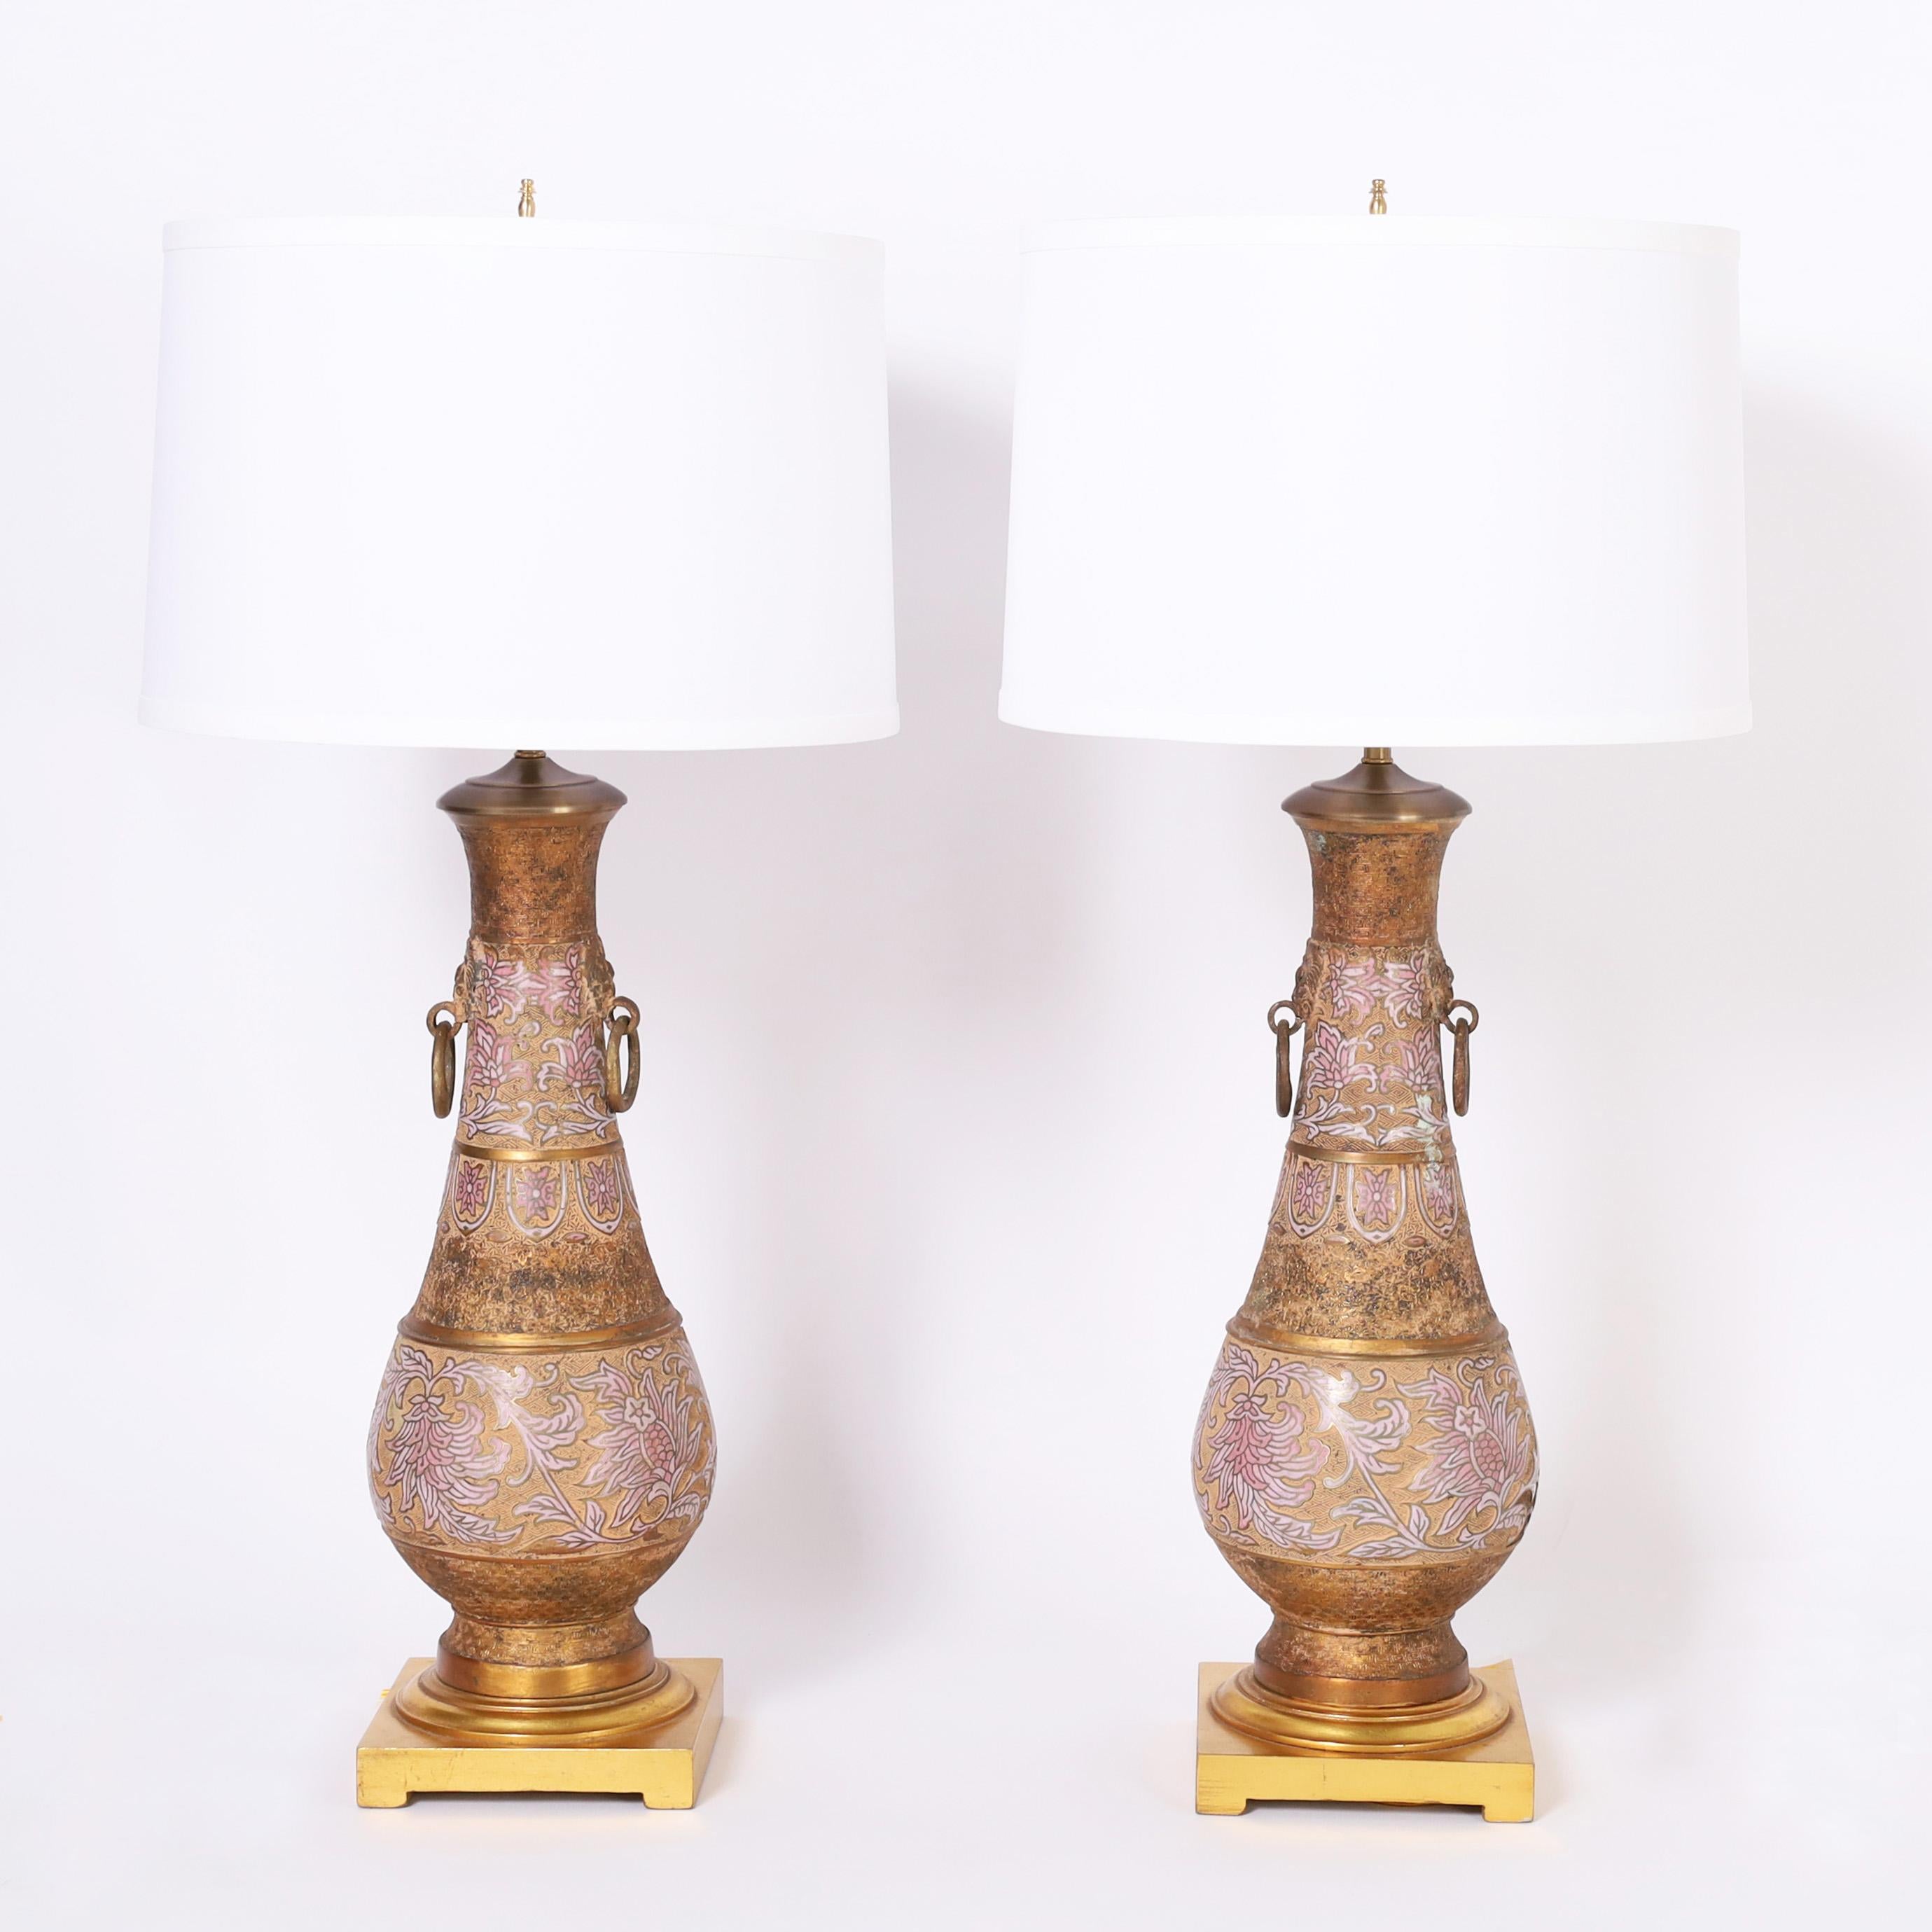 Vintage pair of Anglo Indian table lamps crafted in cast brass with engraved geometric and floral designs decorated with lovely pastel enamel highlights. Presented on gilt wood bases.